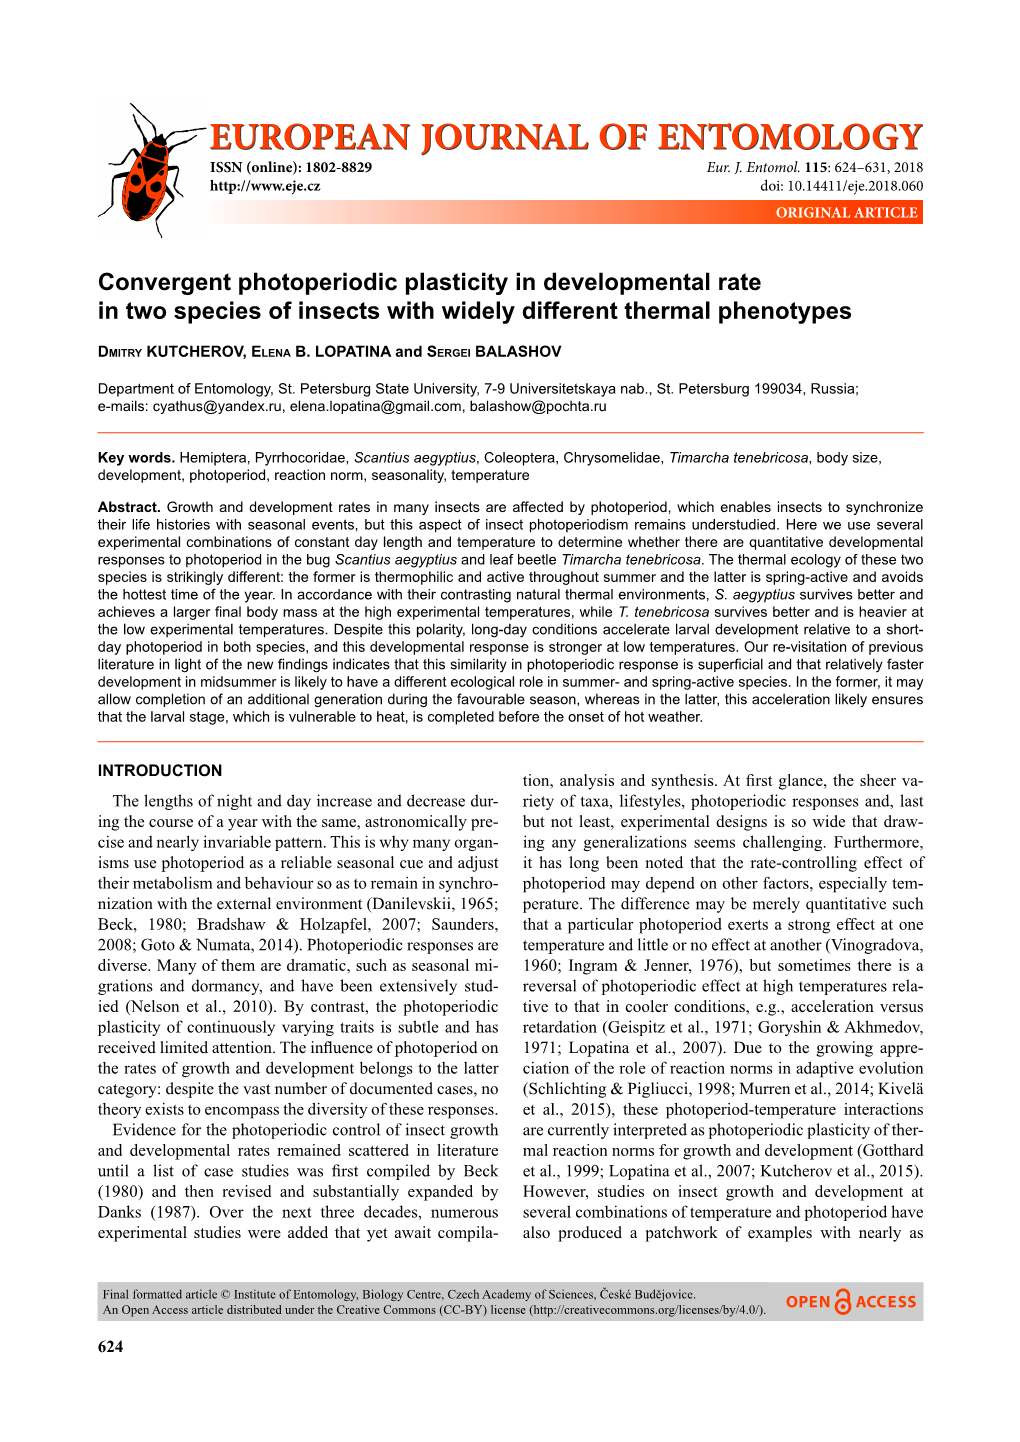 Convergent Photoperiodic Plasticity in Developmental Rate in Two Species of Insects with Widely Different Thermal Phenotypes